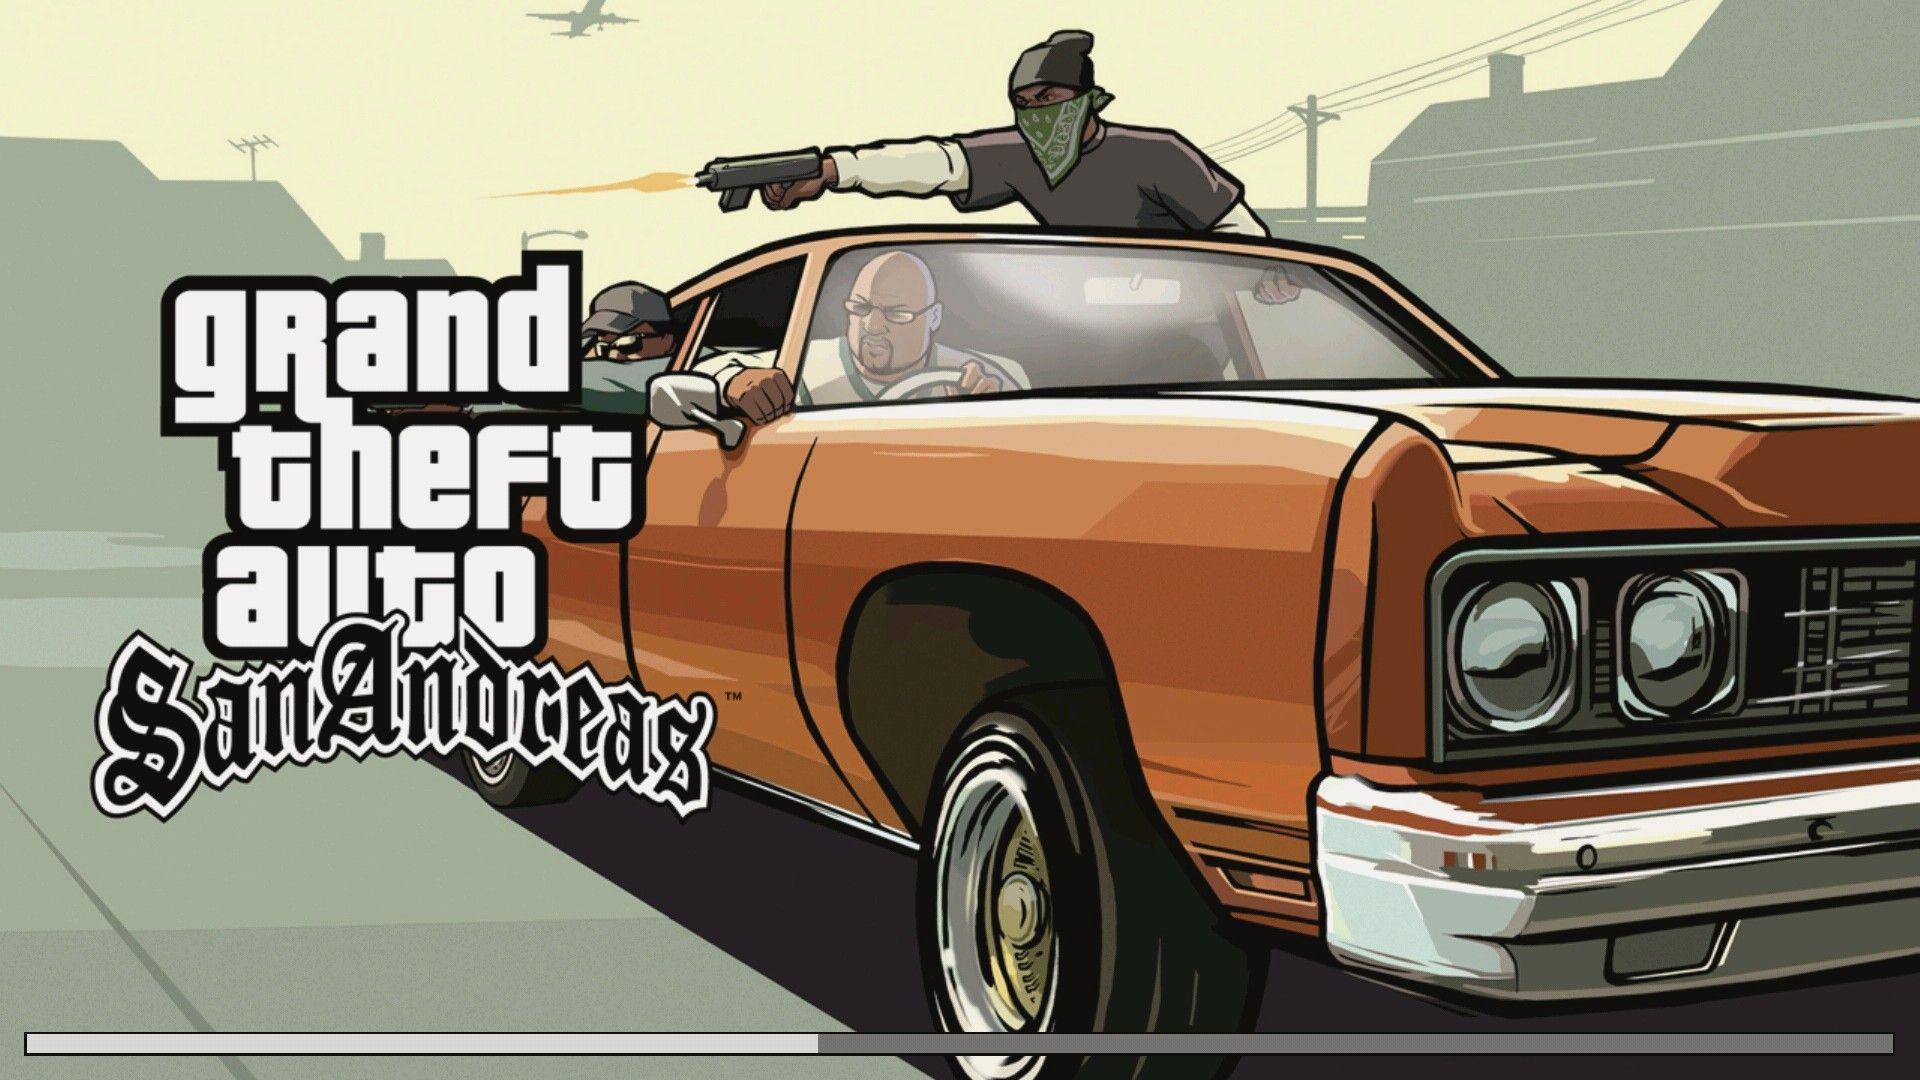 Best Grand theft auto san andreas hd iPhone HD Wallpapers  iLikeWallpaper